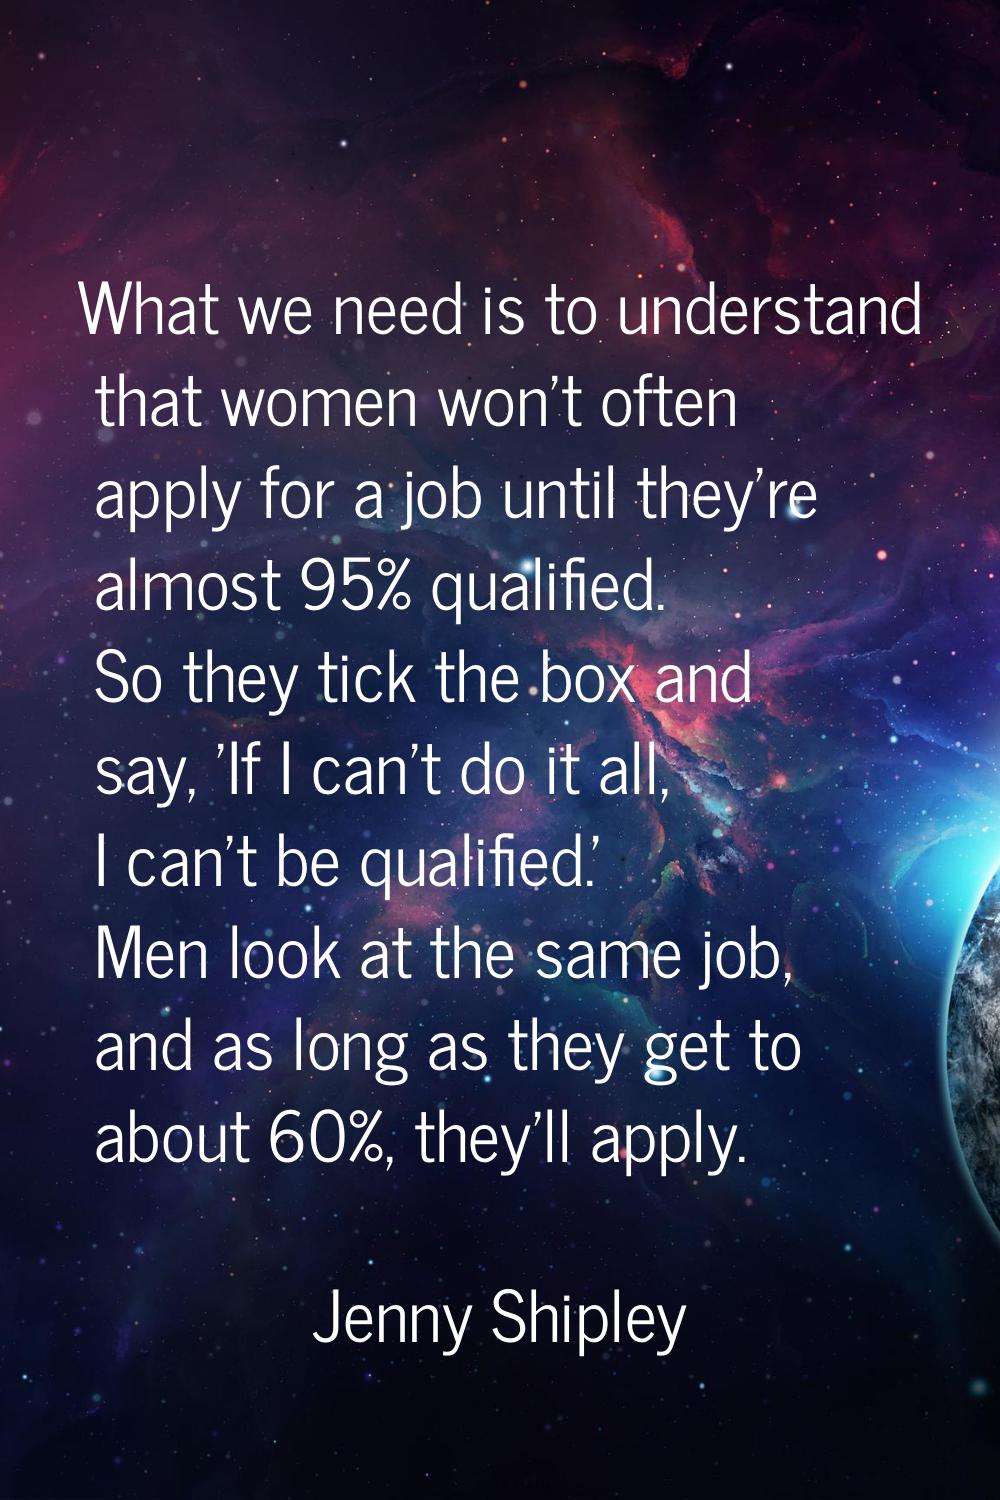 What we need is to understand that women won't often apply for a job until they're almost 95% quali